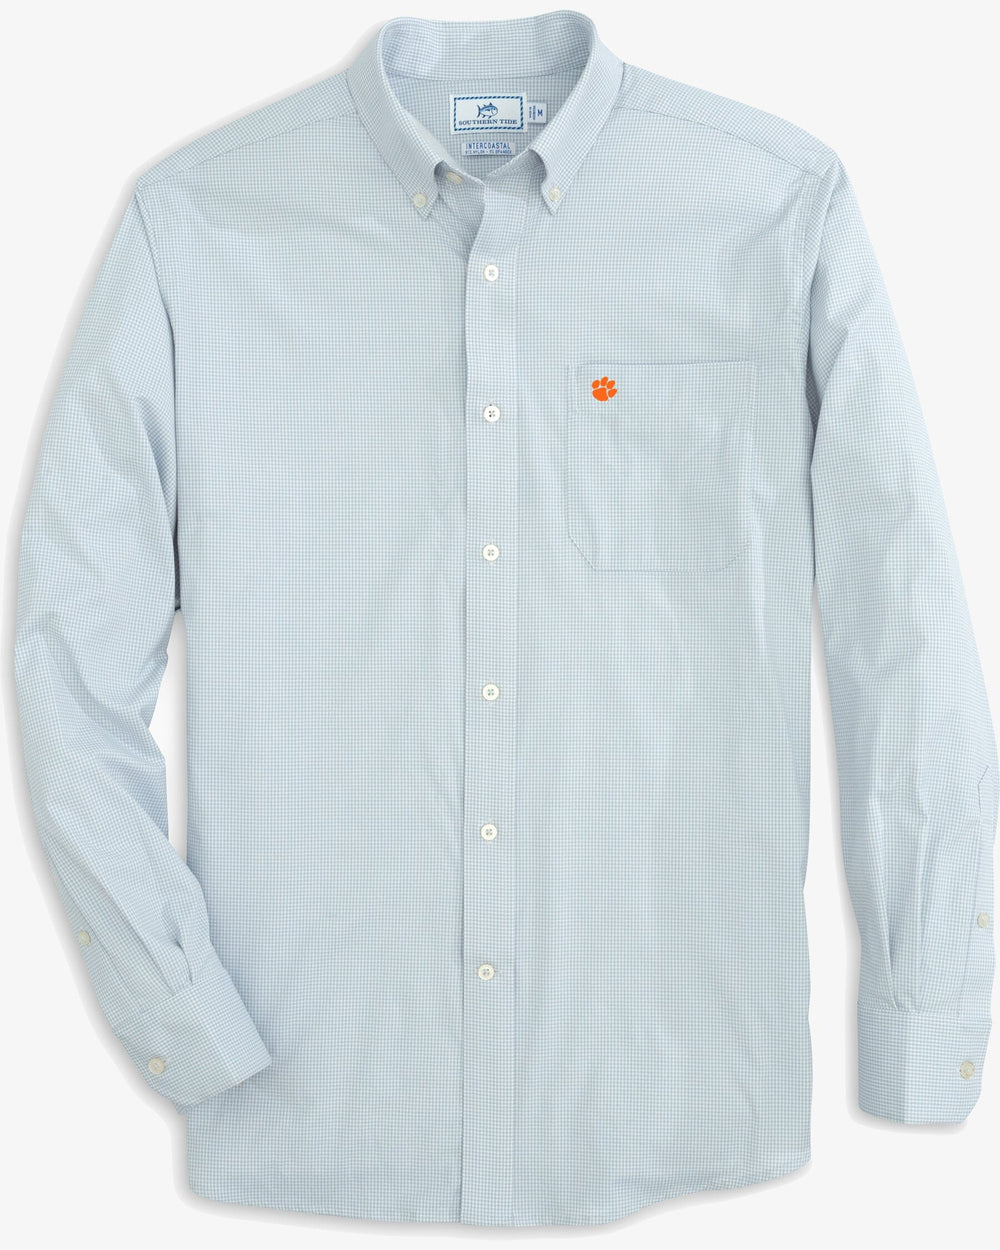 The front view of the Clemson Tigers Gingham Button Down Shirt by Southern Tide - Slate Grey